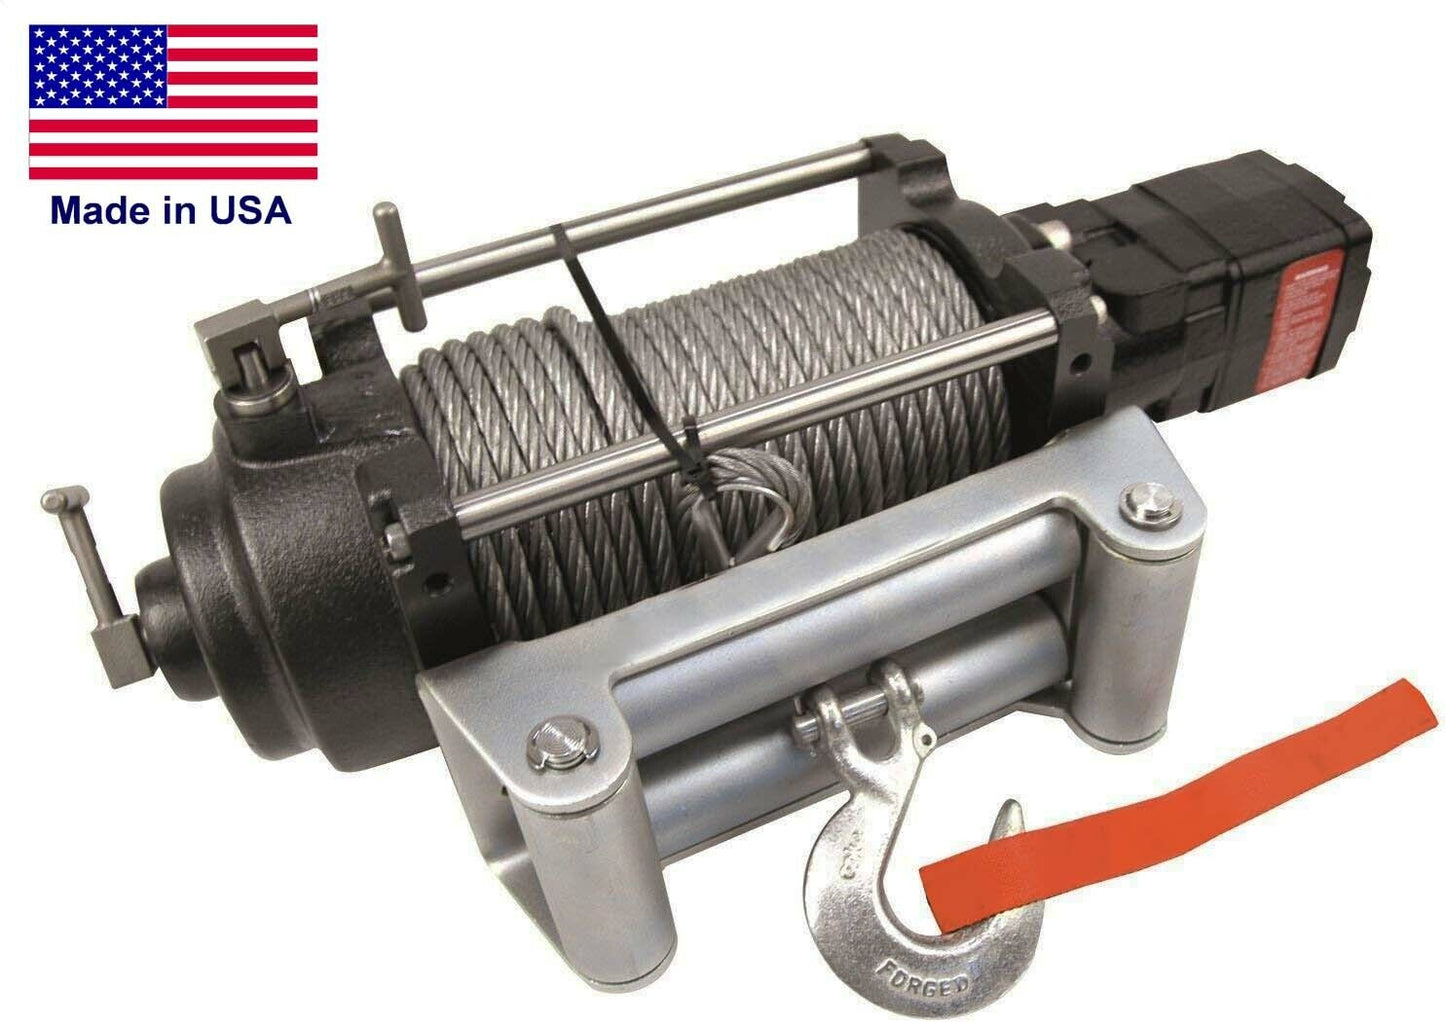 Hydraulic Winch for FORD RANGER - 12000 lbs Cap - Waterproof - Reversible